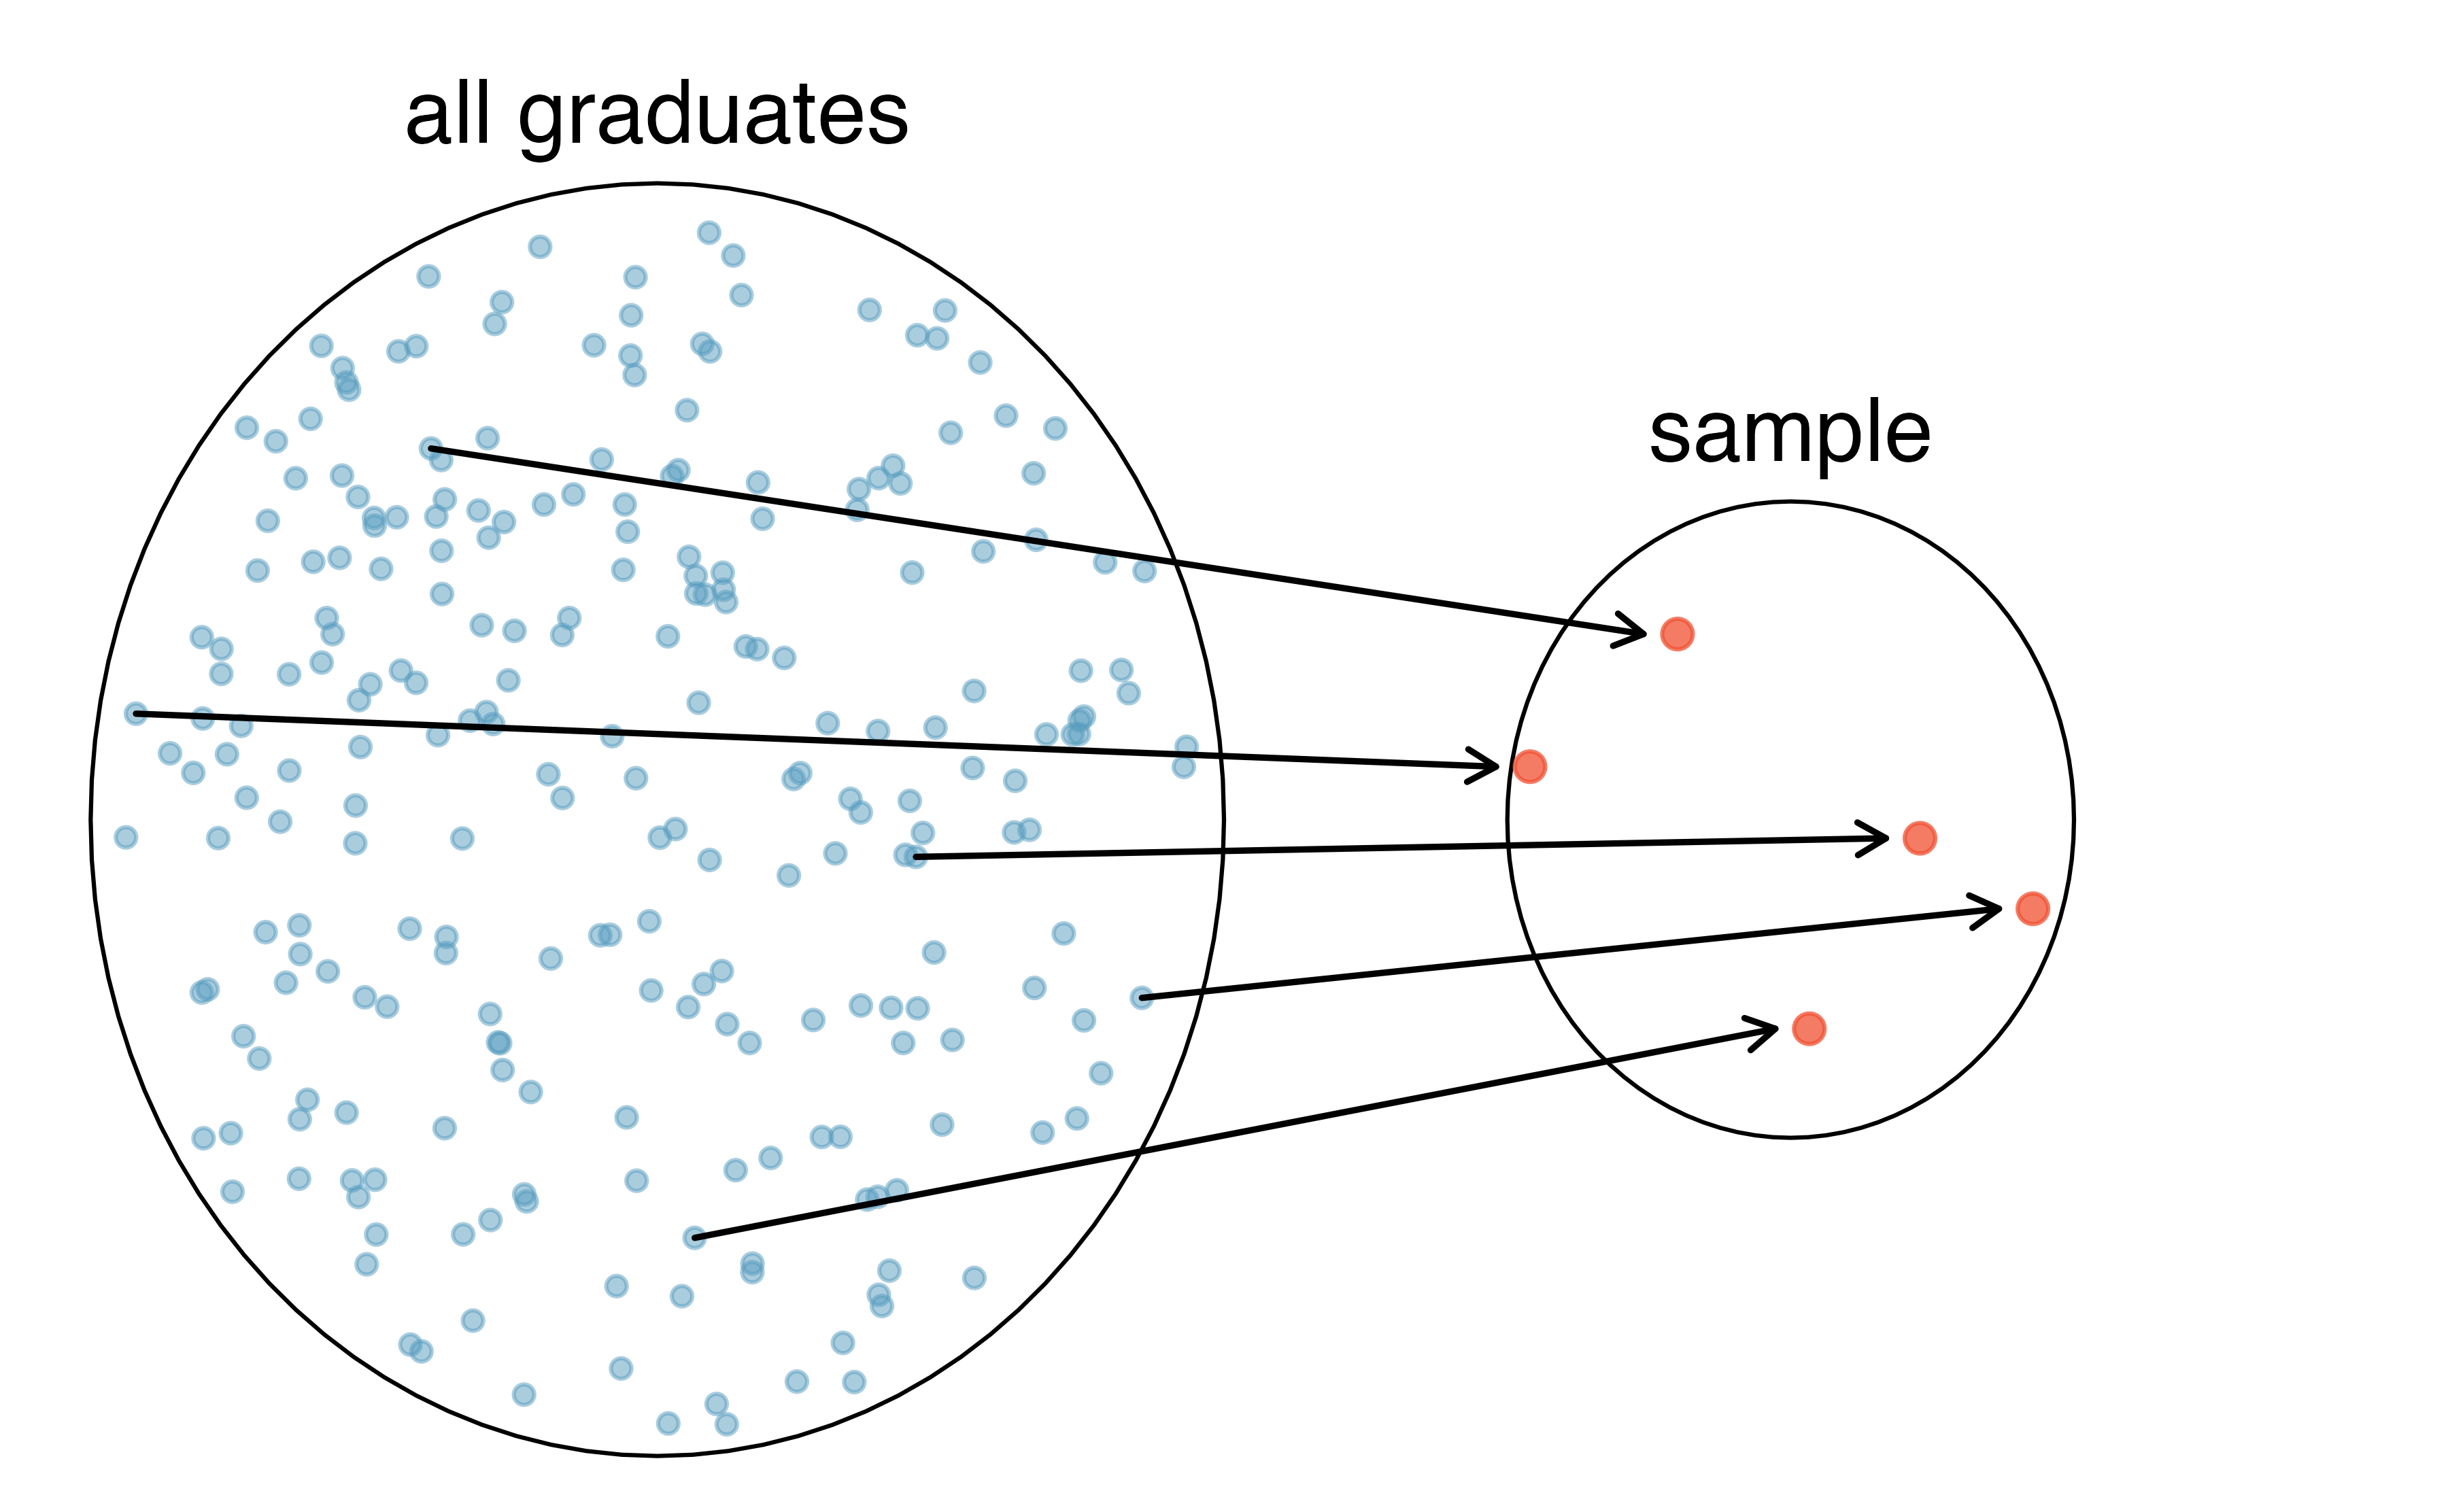 In this graphic, five graduates are randomly selected from the population (all graduates in the last 5 years) to be included in the sample.